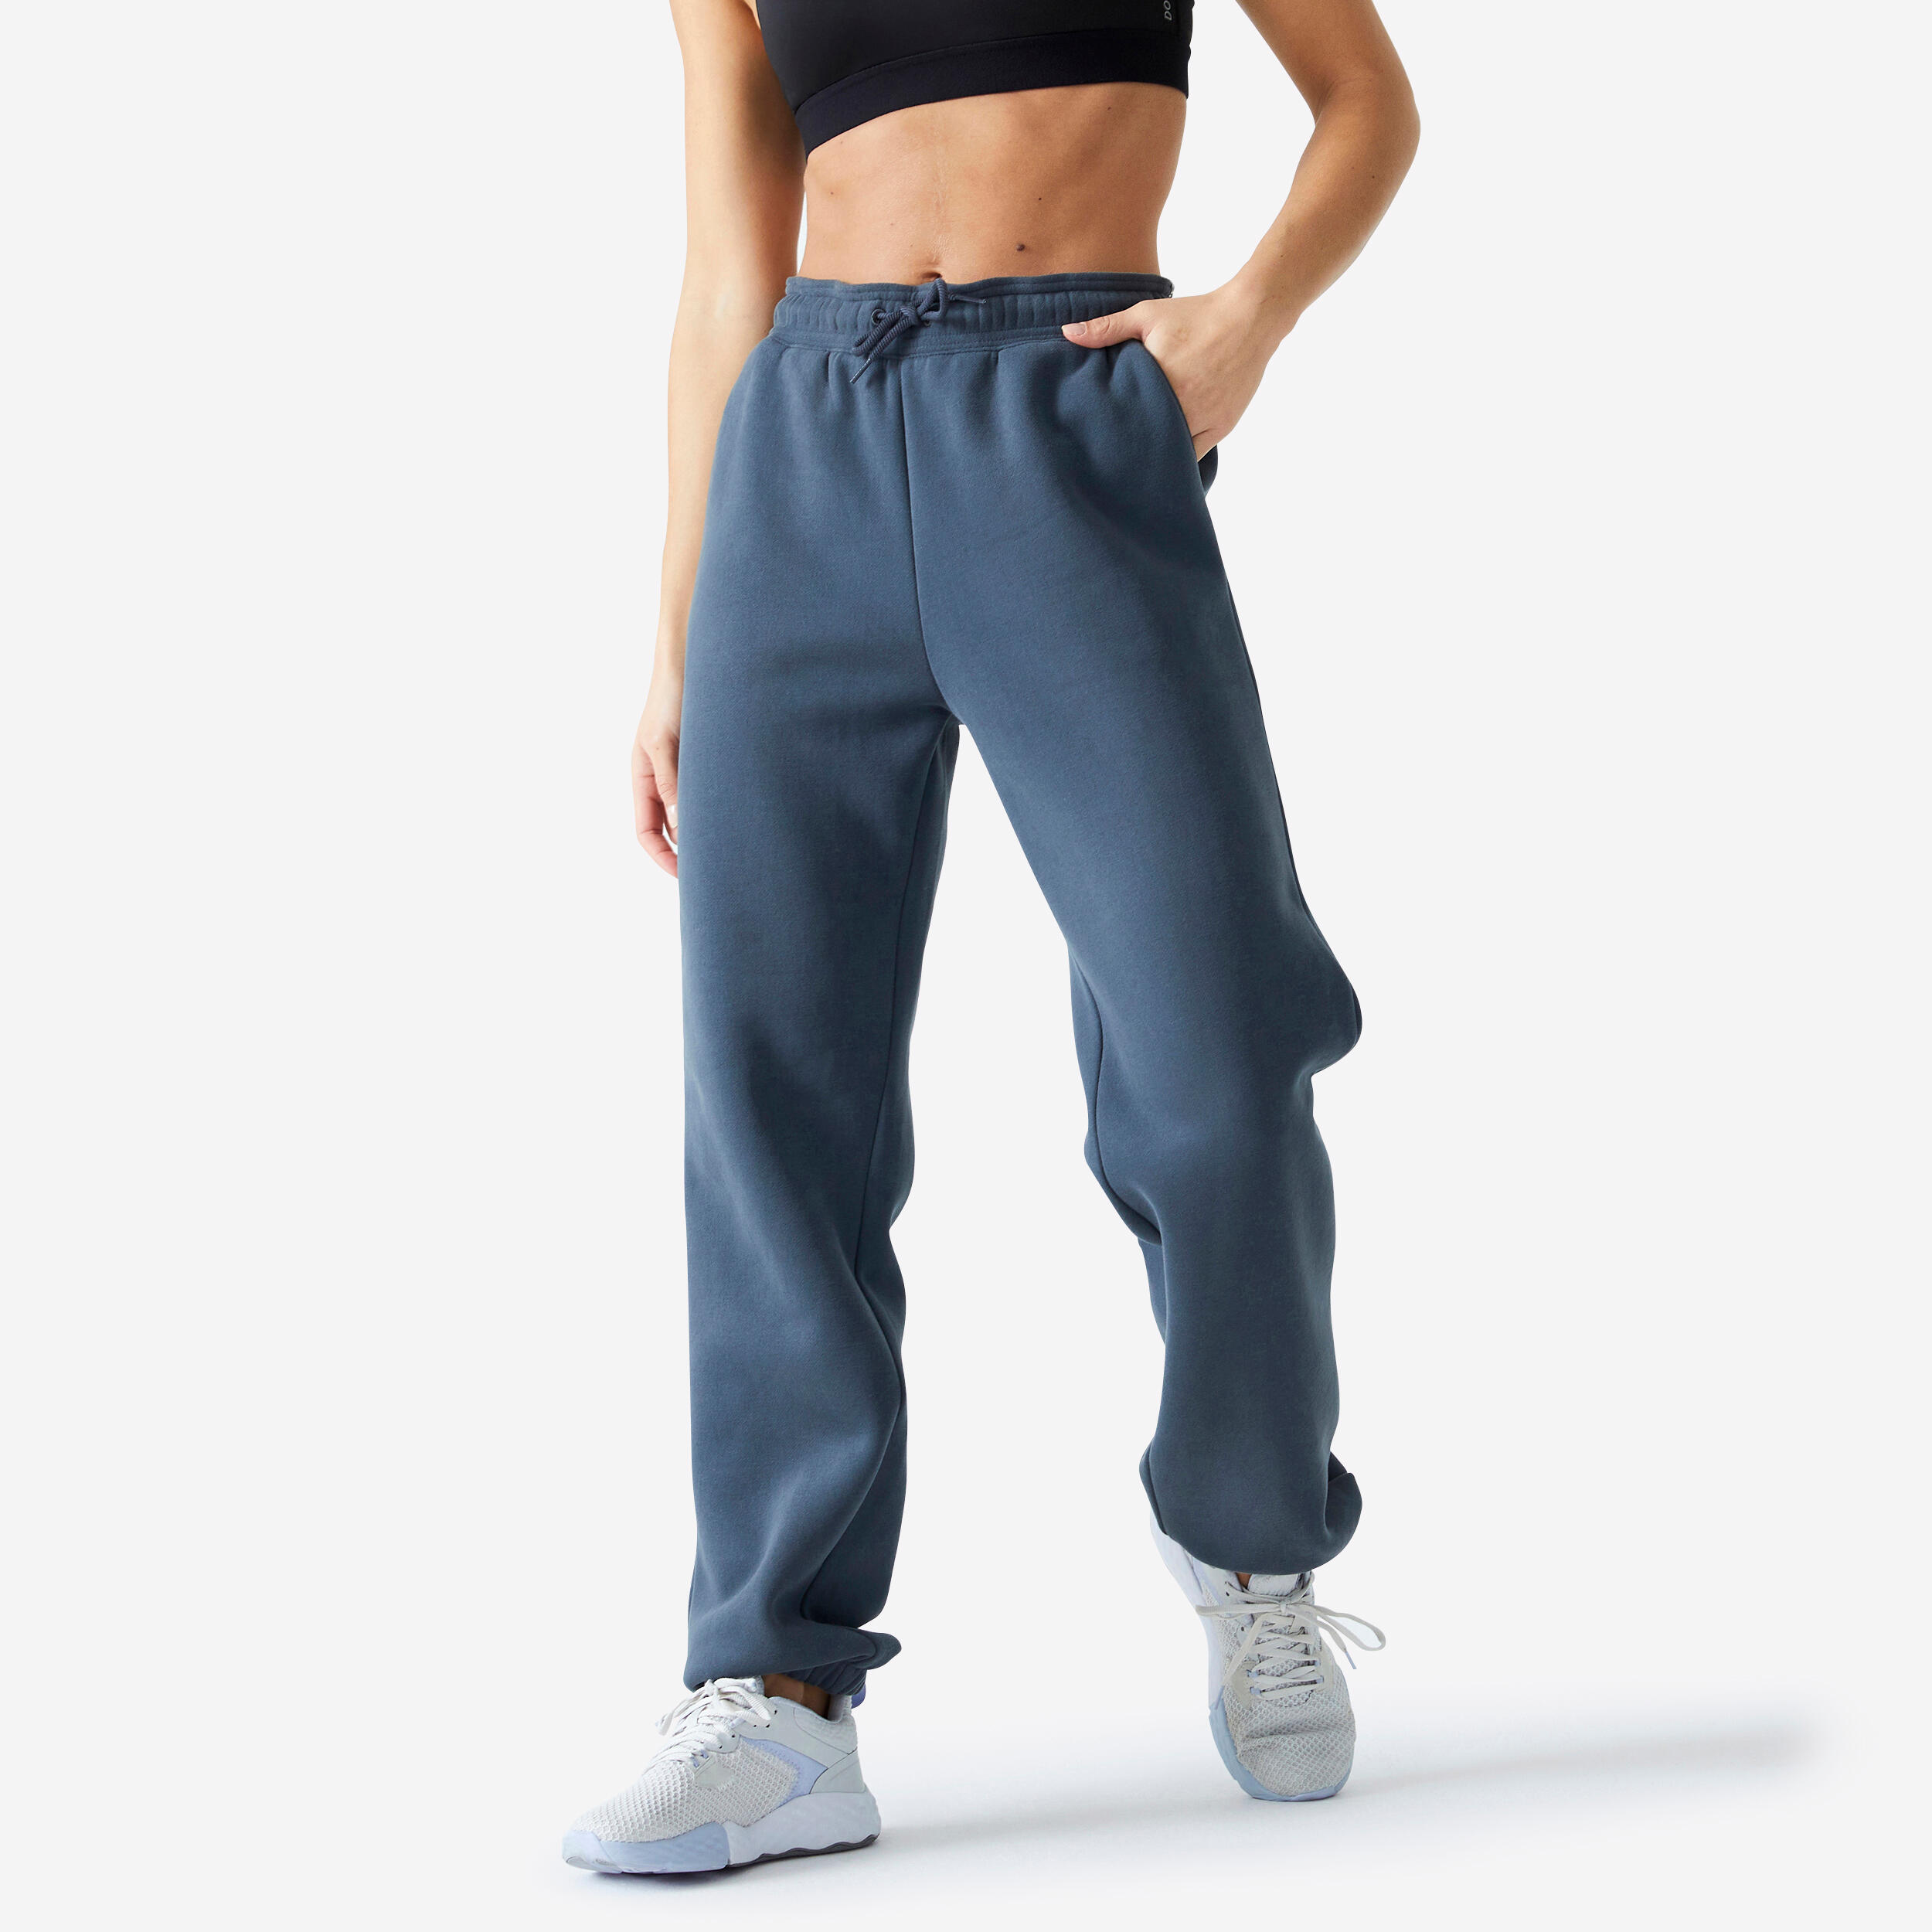 Women's Loose-Fit Fitness Jogging Bottoms 520 - Abyss Grey 1/6